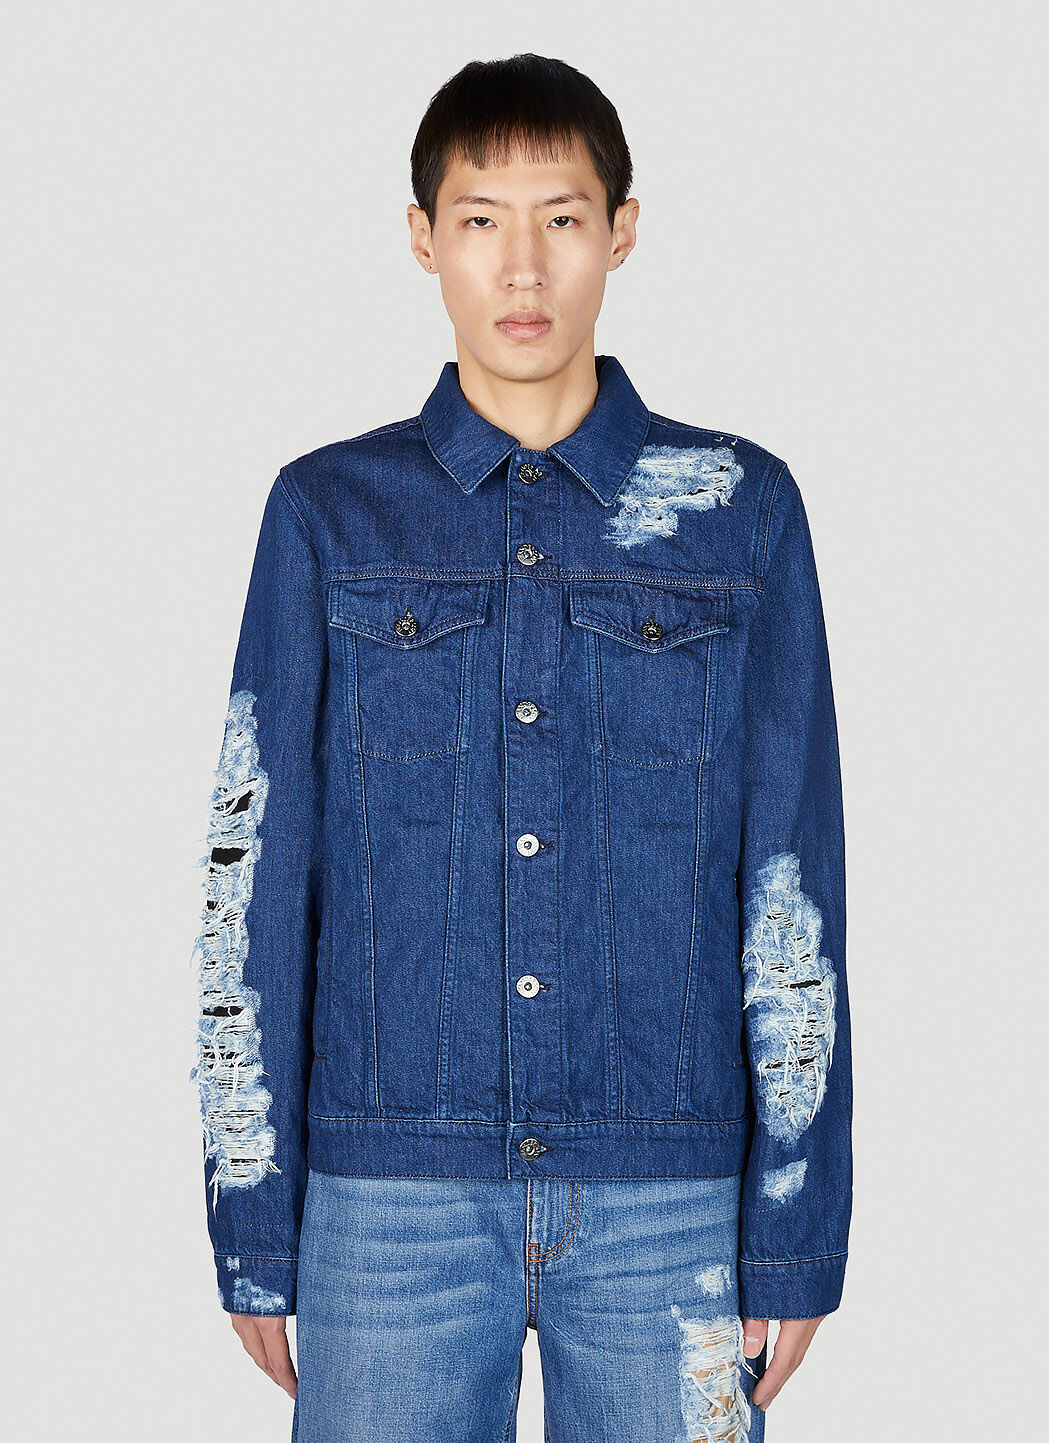 Mens Jacket Men Autumn Winter Casual Vintage Wash Distressed Denim Jacket  Coat Top Asian Size S 5XL From Blueberry12, $27.38 | DHgate.Com